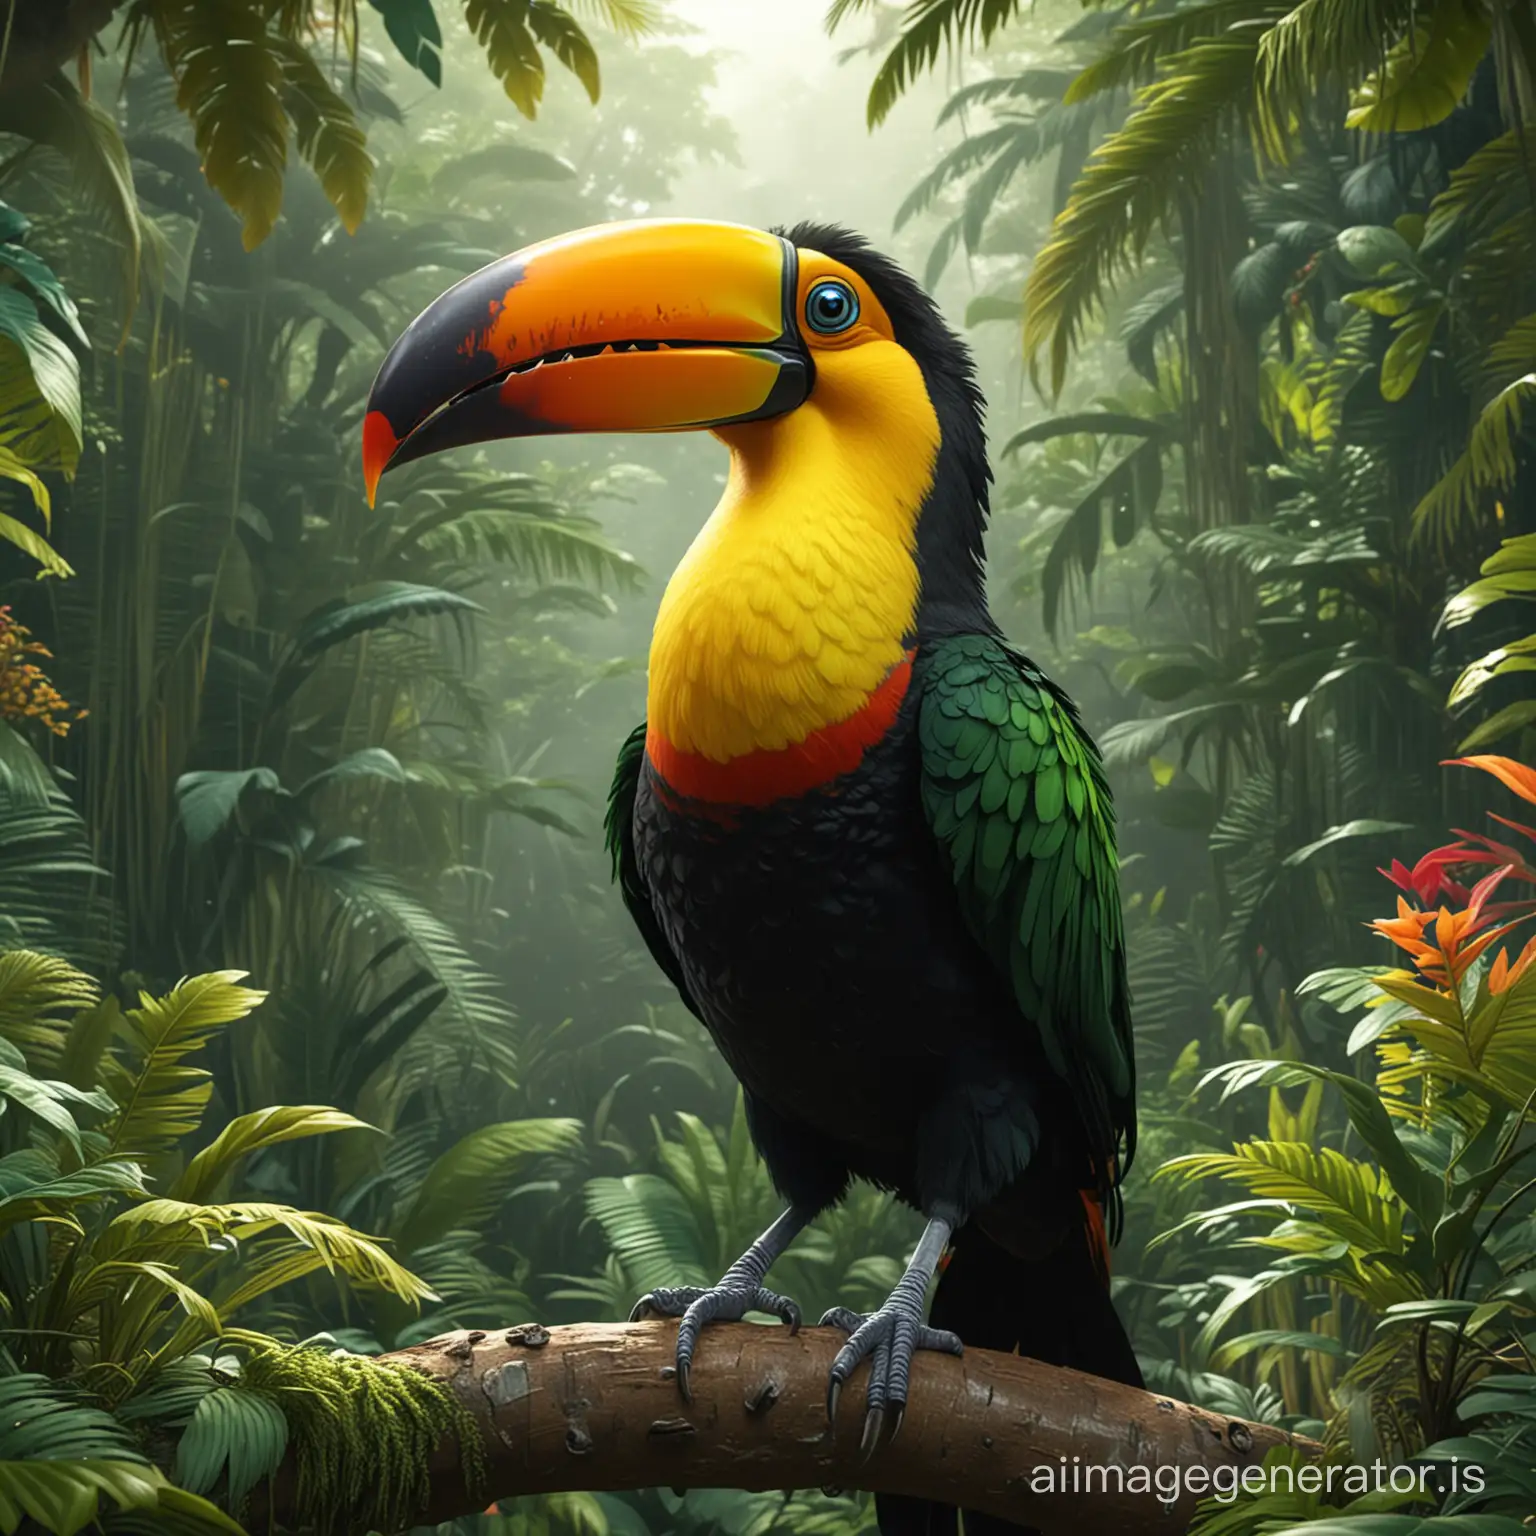 a medium quality 3d rendering of a toucan bird with heavy green feathers, cartoon style, highly detailed and realistic, sharpened details, vibrant colors, jungle setting, front view, character design, bright and colorful, digital art, CGI, animation, tropical theme